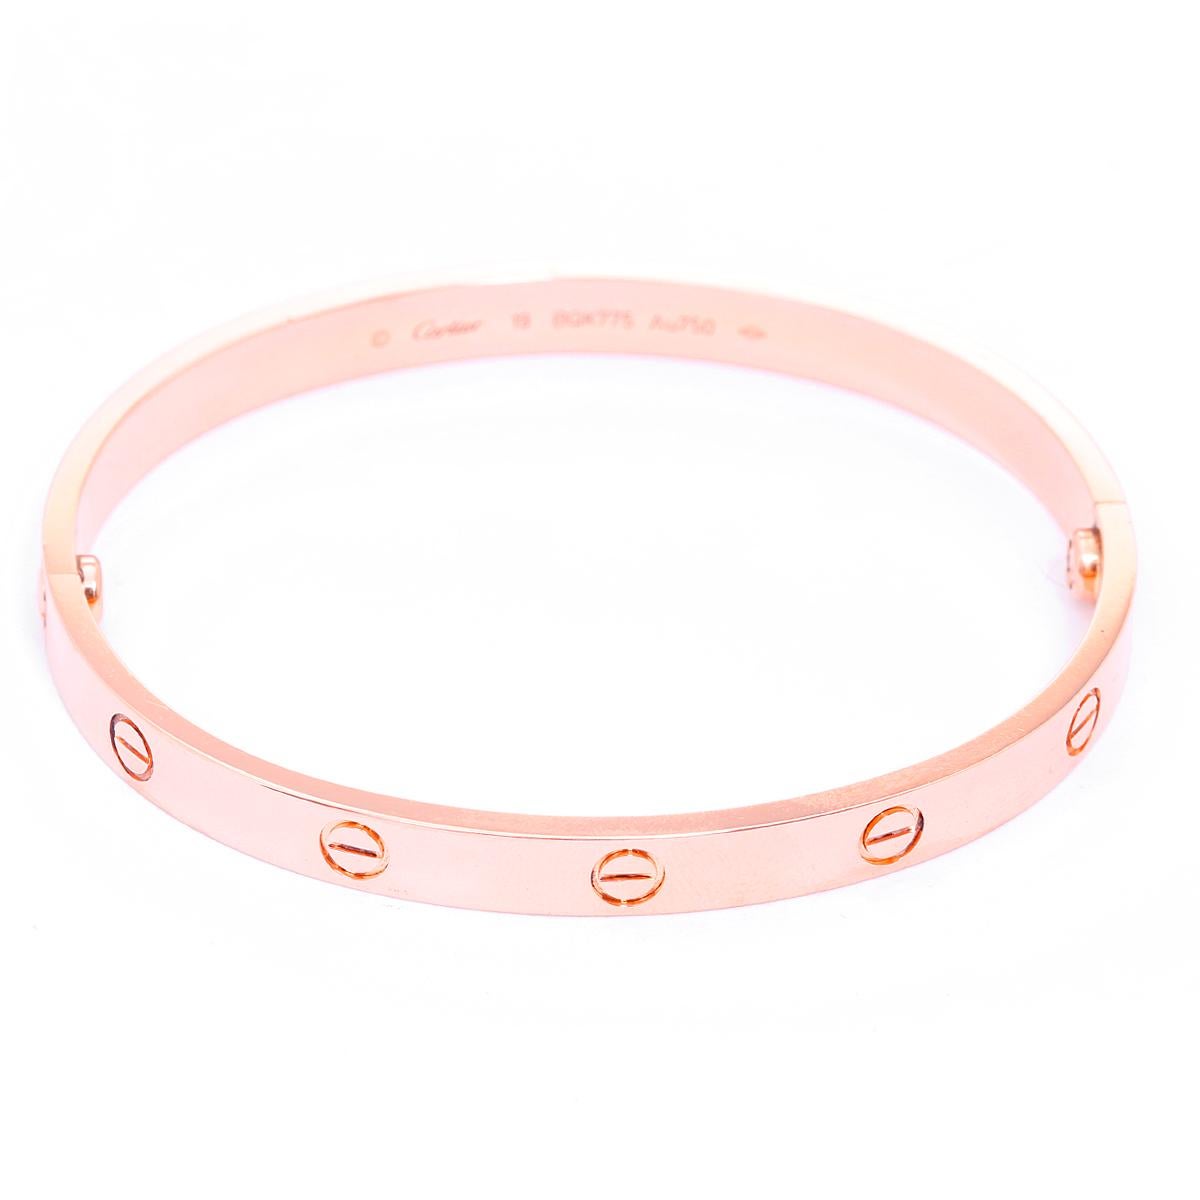 Cartier Love Bracelet 18k Rose Gold Size 19 with Screwdriver - . This beautiful bracelet is stamped Cartier, 19, 750  and BQK775.  This is a great piece for everyday as well as dress. Authenticity guaranteed. Like new condition with no dings or